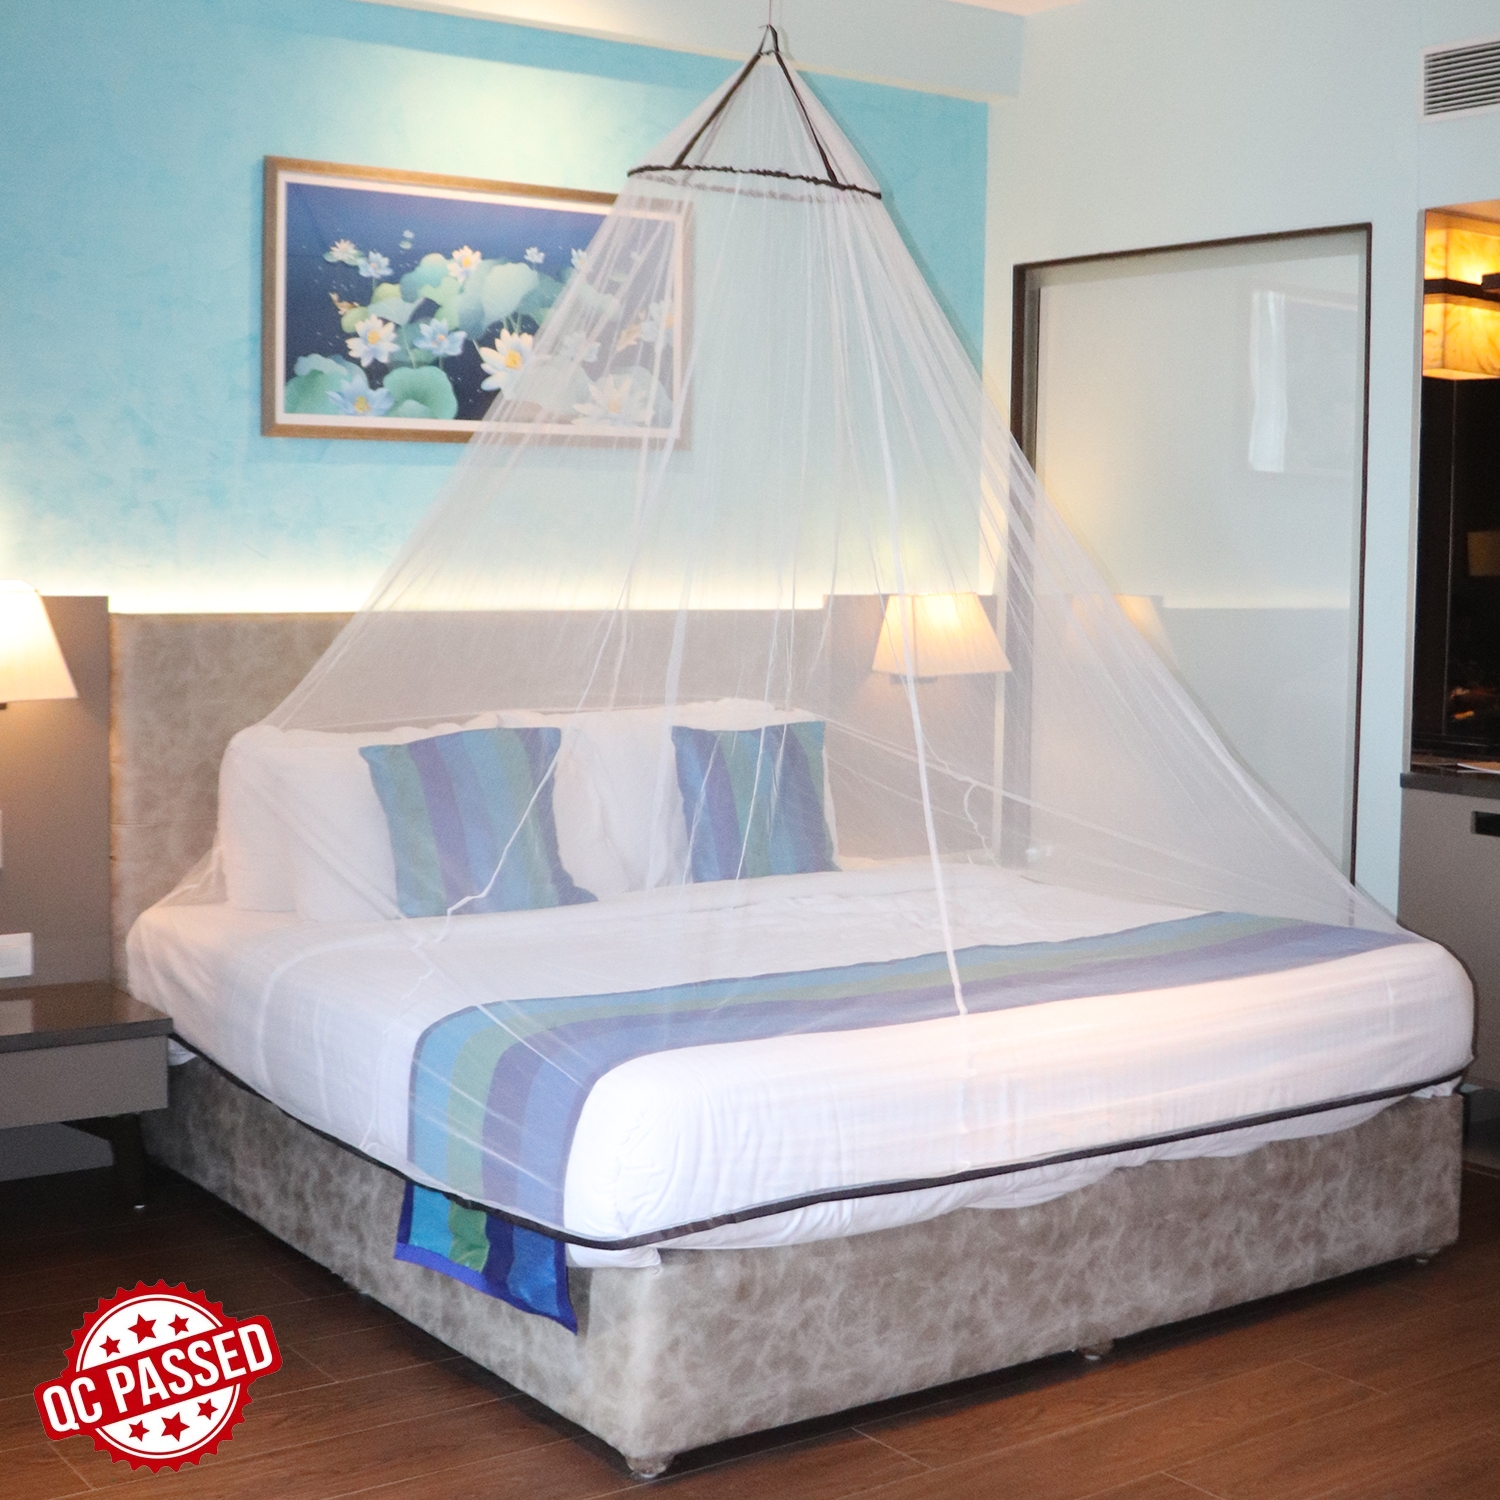 SILVER SHINE | Mosquito Net for Double Bed, King-Size, Round Ceiling Hanging Foldable Polyester Net White And Brown 0